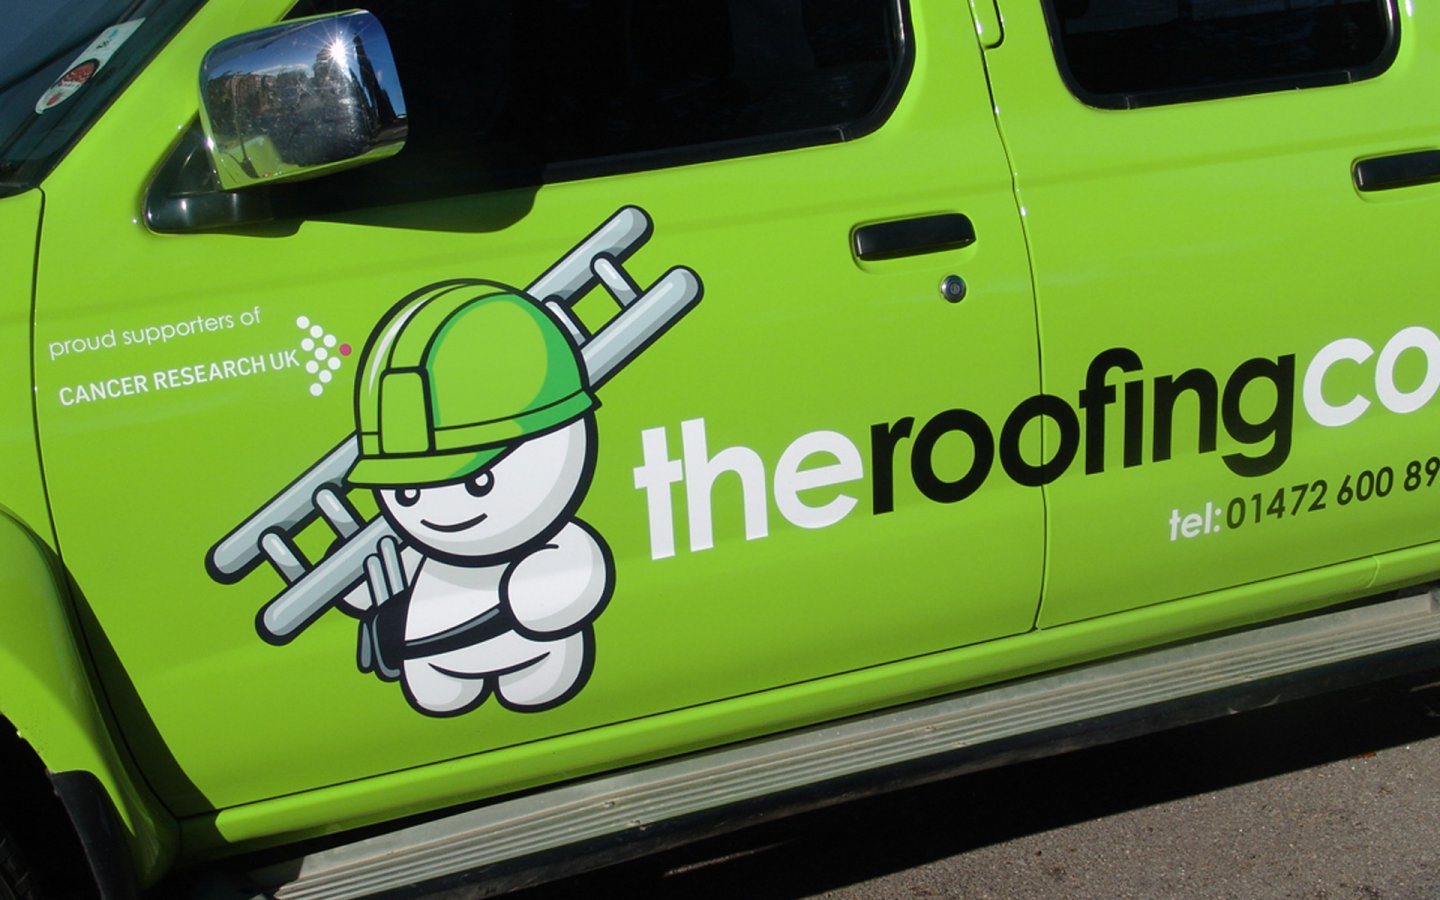 The Roofing Company, Logo Design in Car Livery